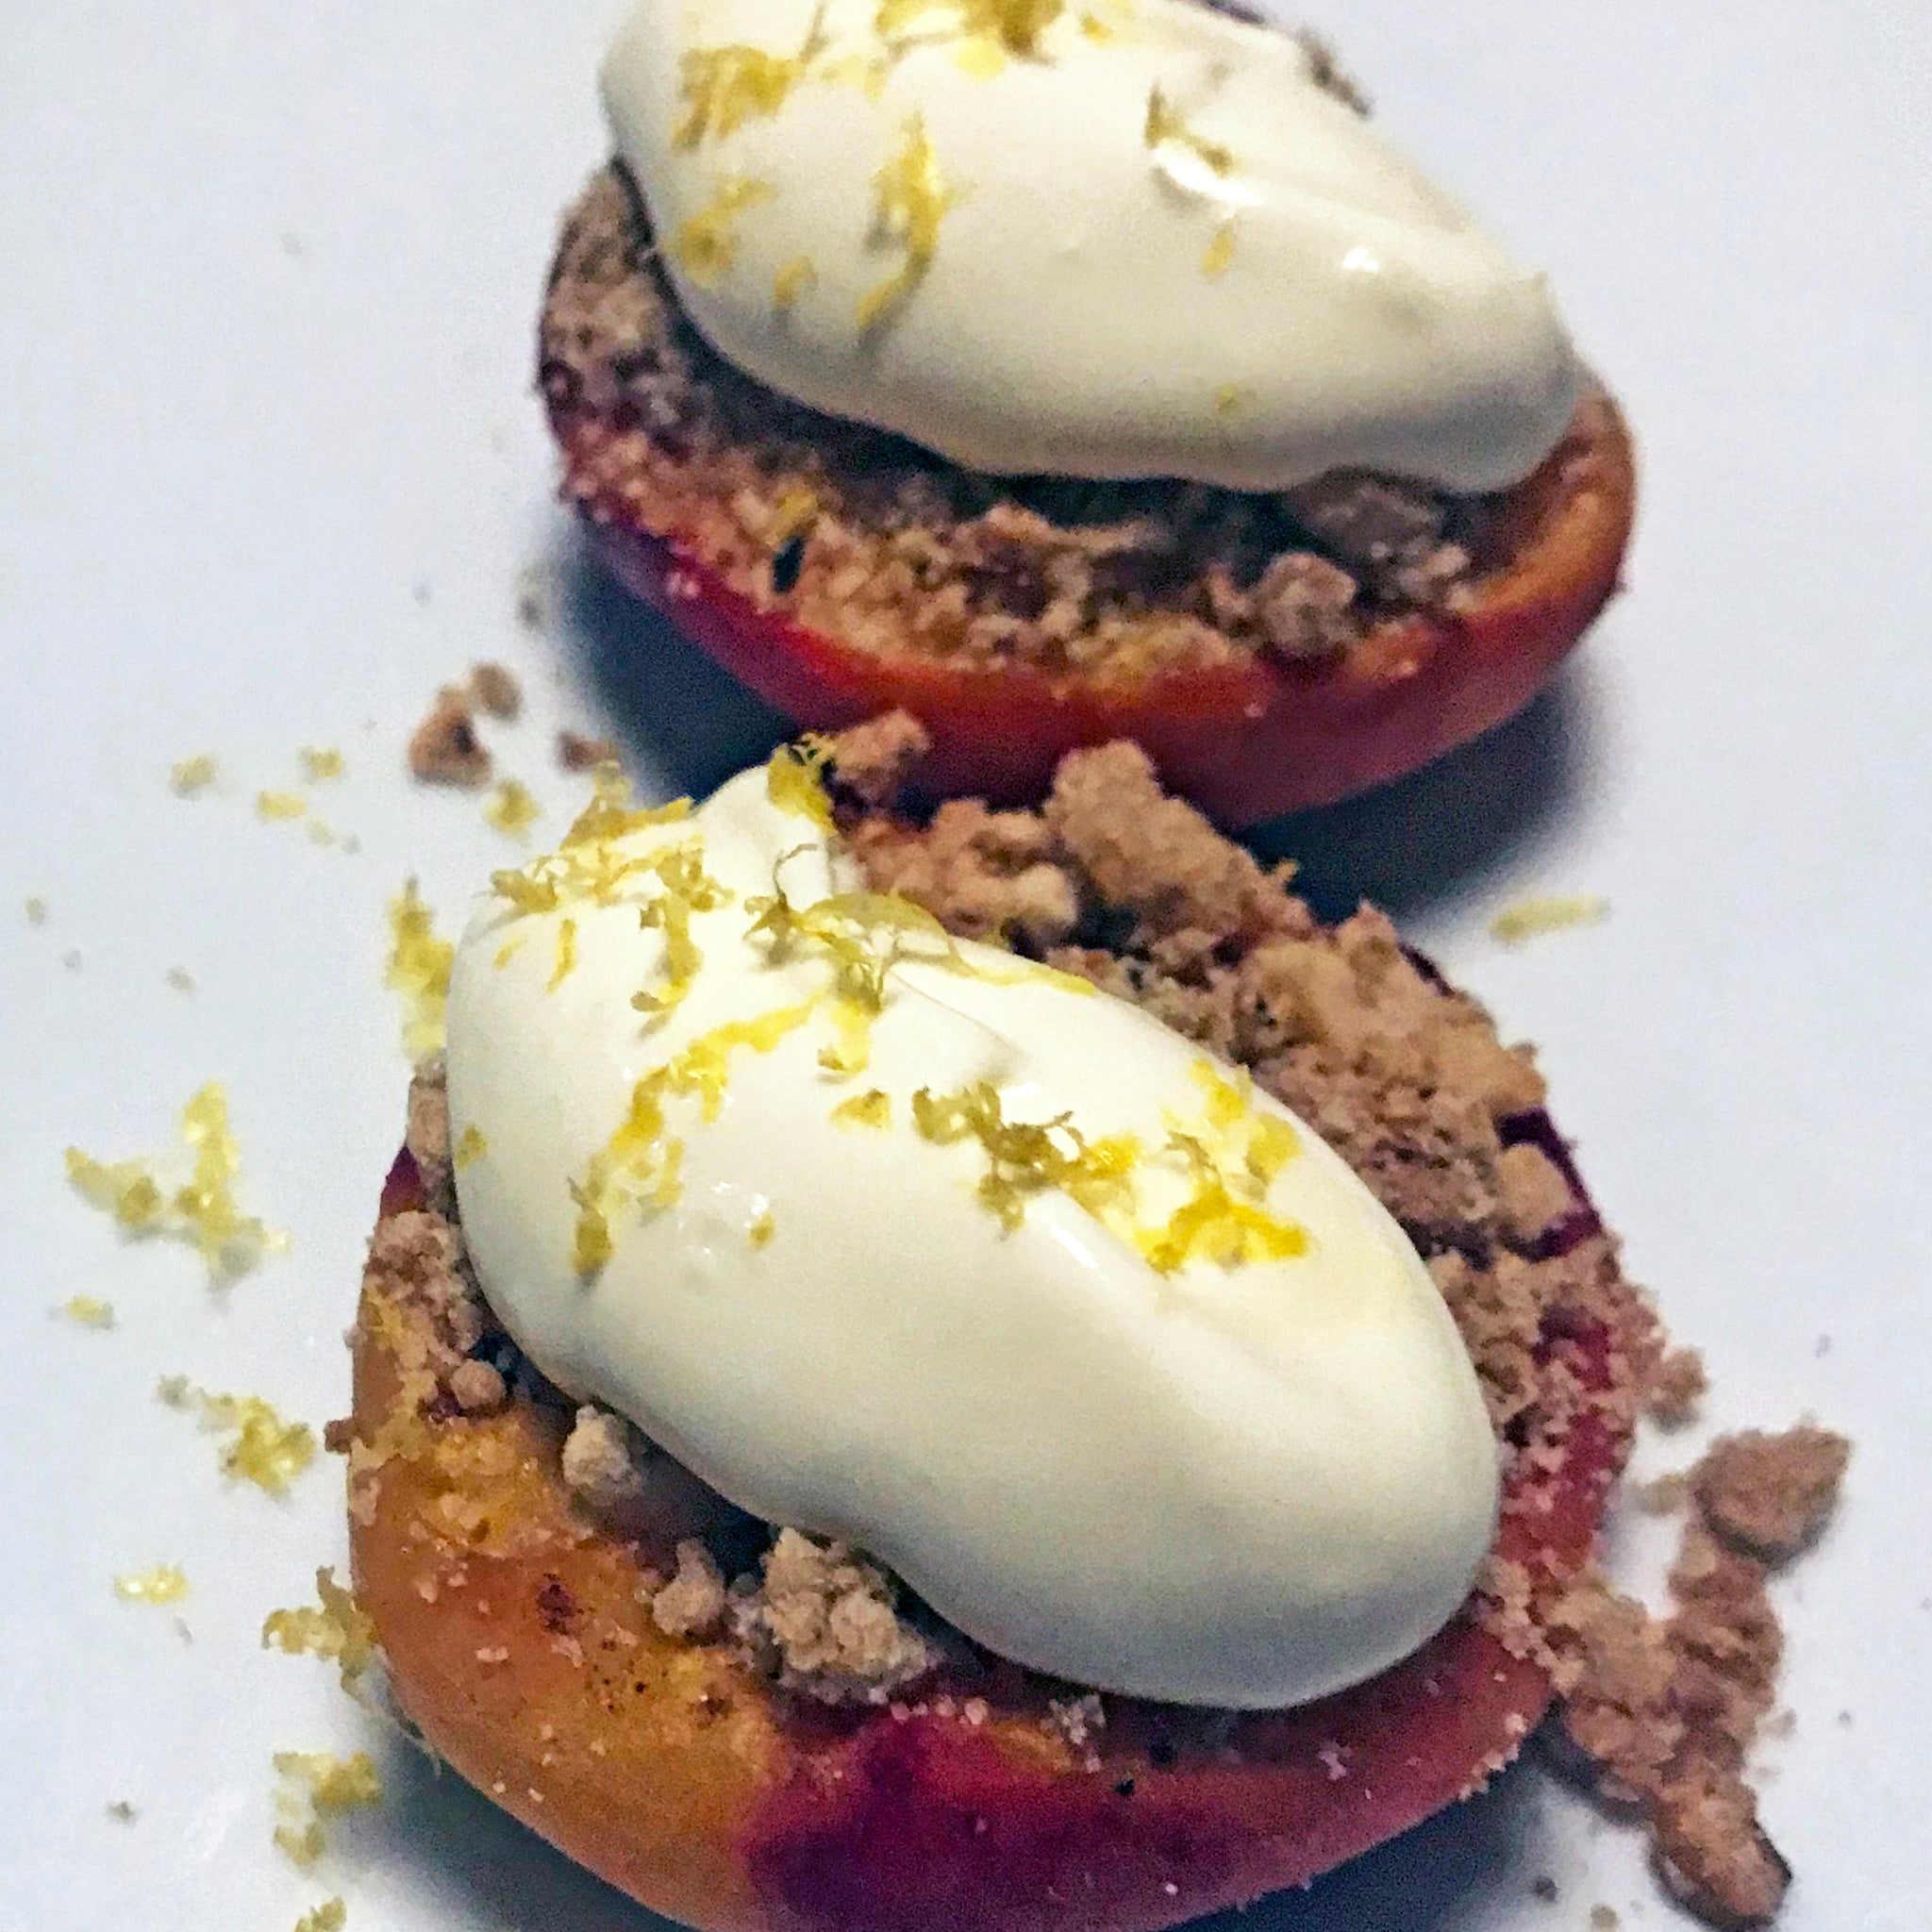 Mumbai Meal: Baked Peaches with Cardamom Crumble